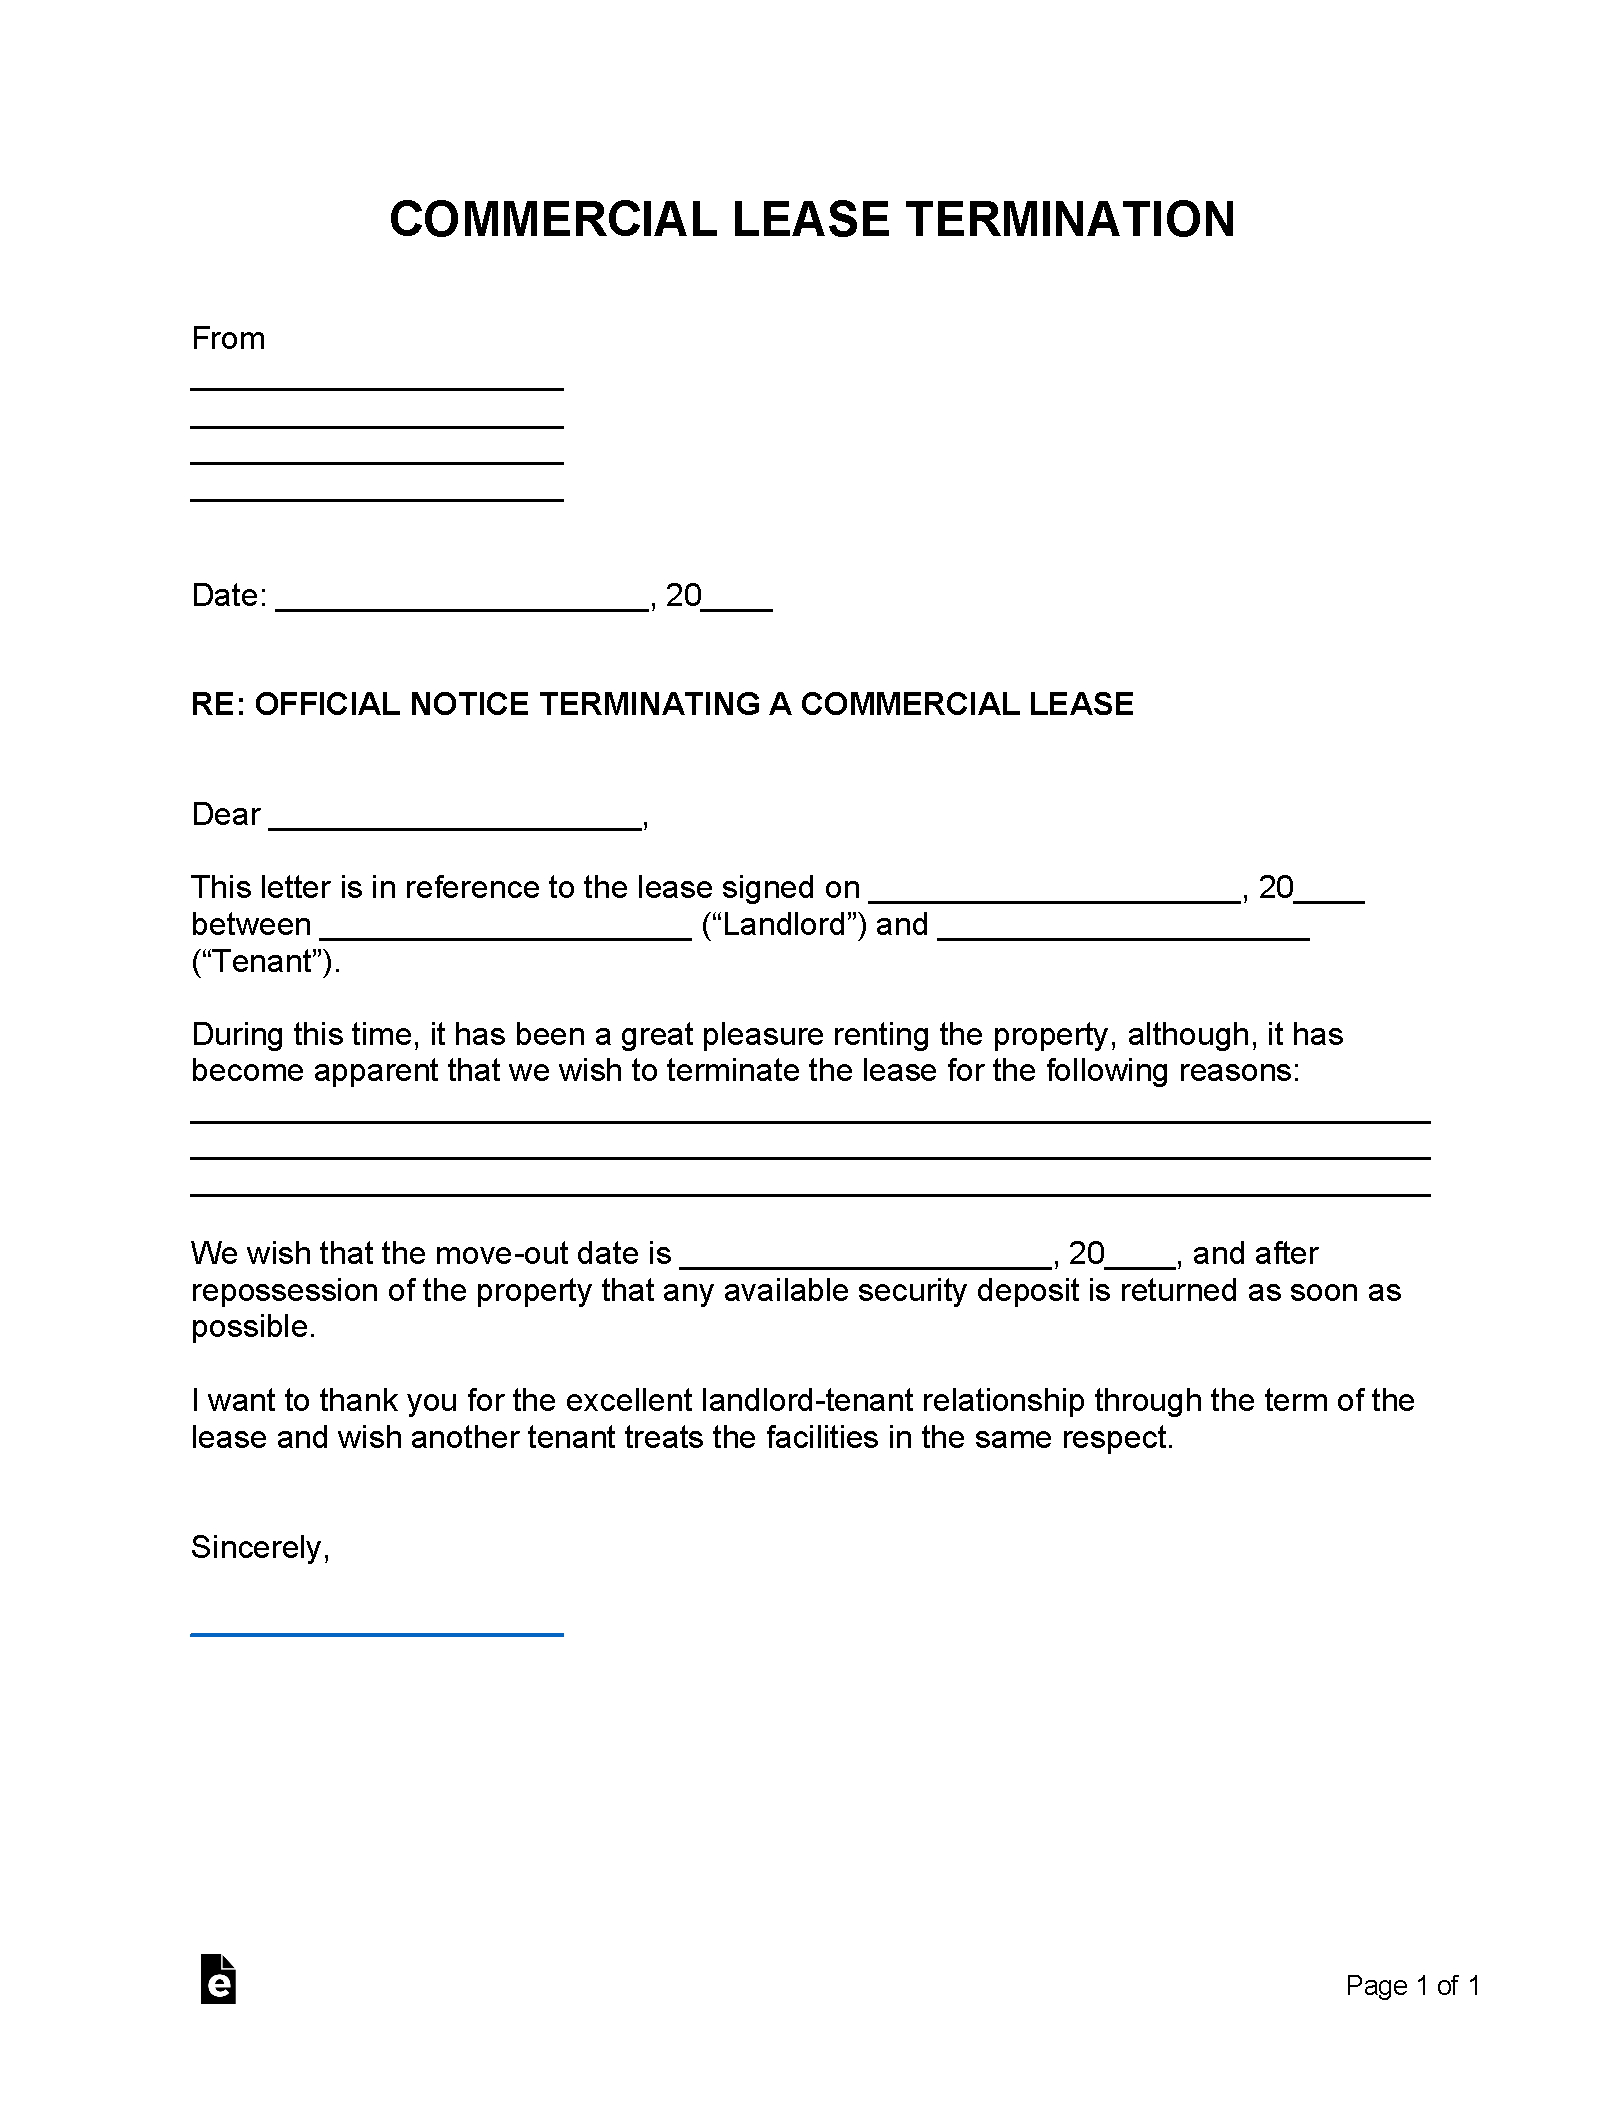 lease-termination-letter